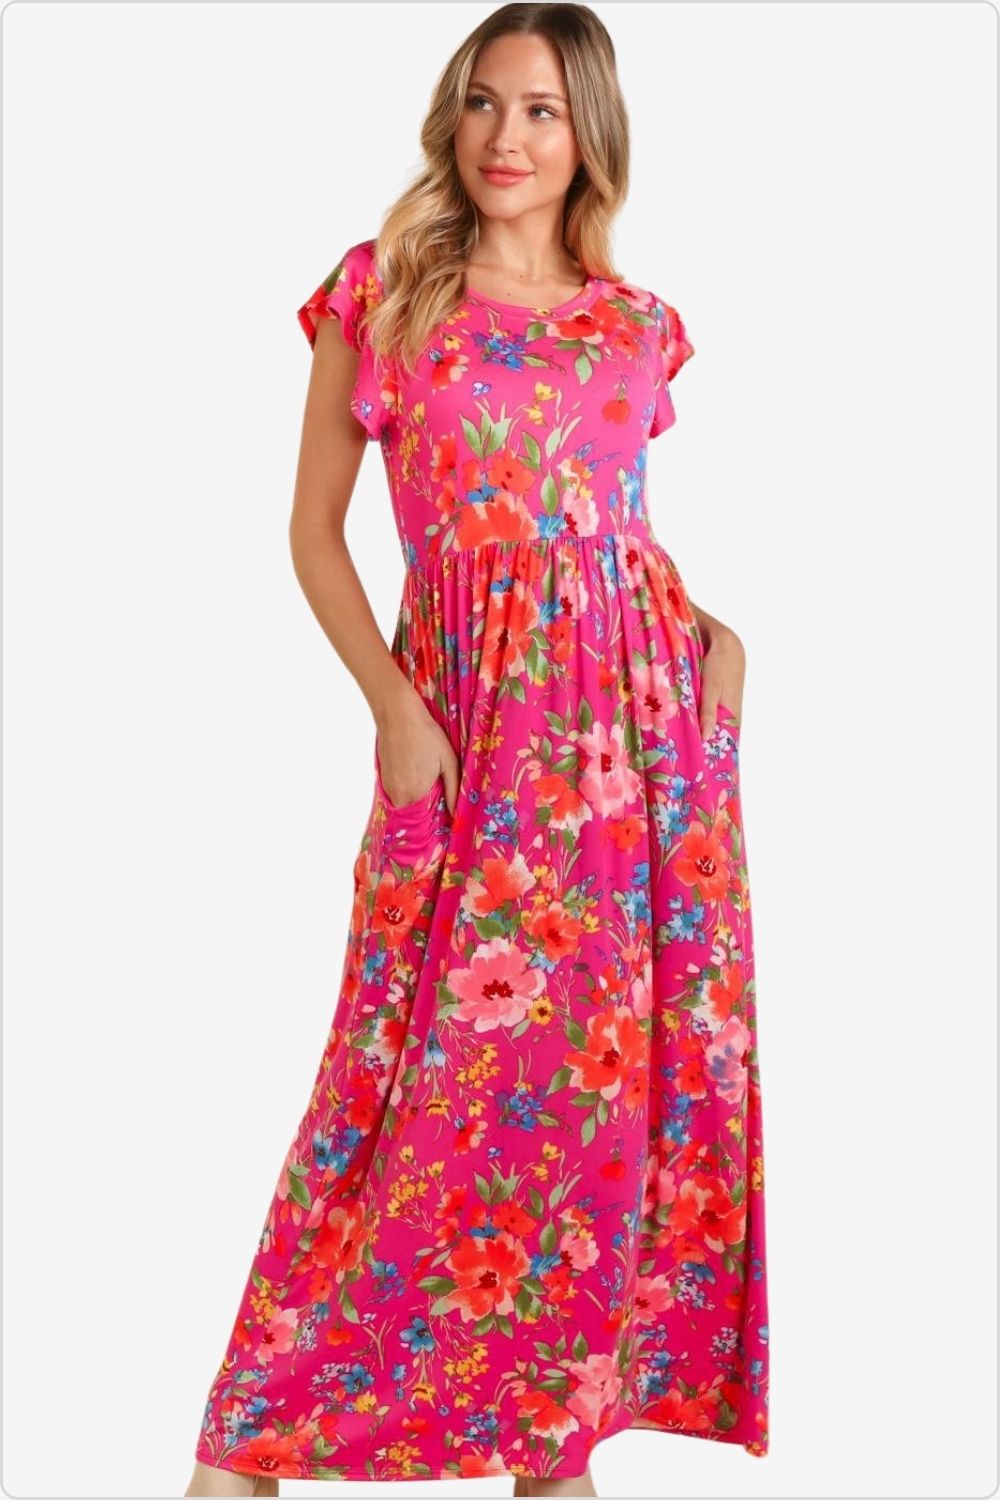 Stunning front view of floral ruffled cap sleeve dress, Color Fuchsia